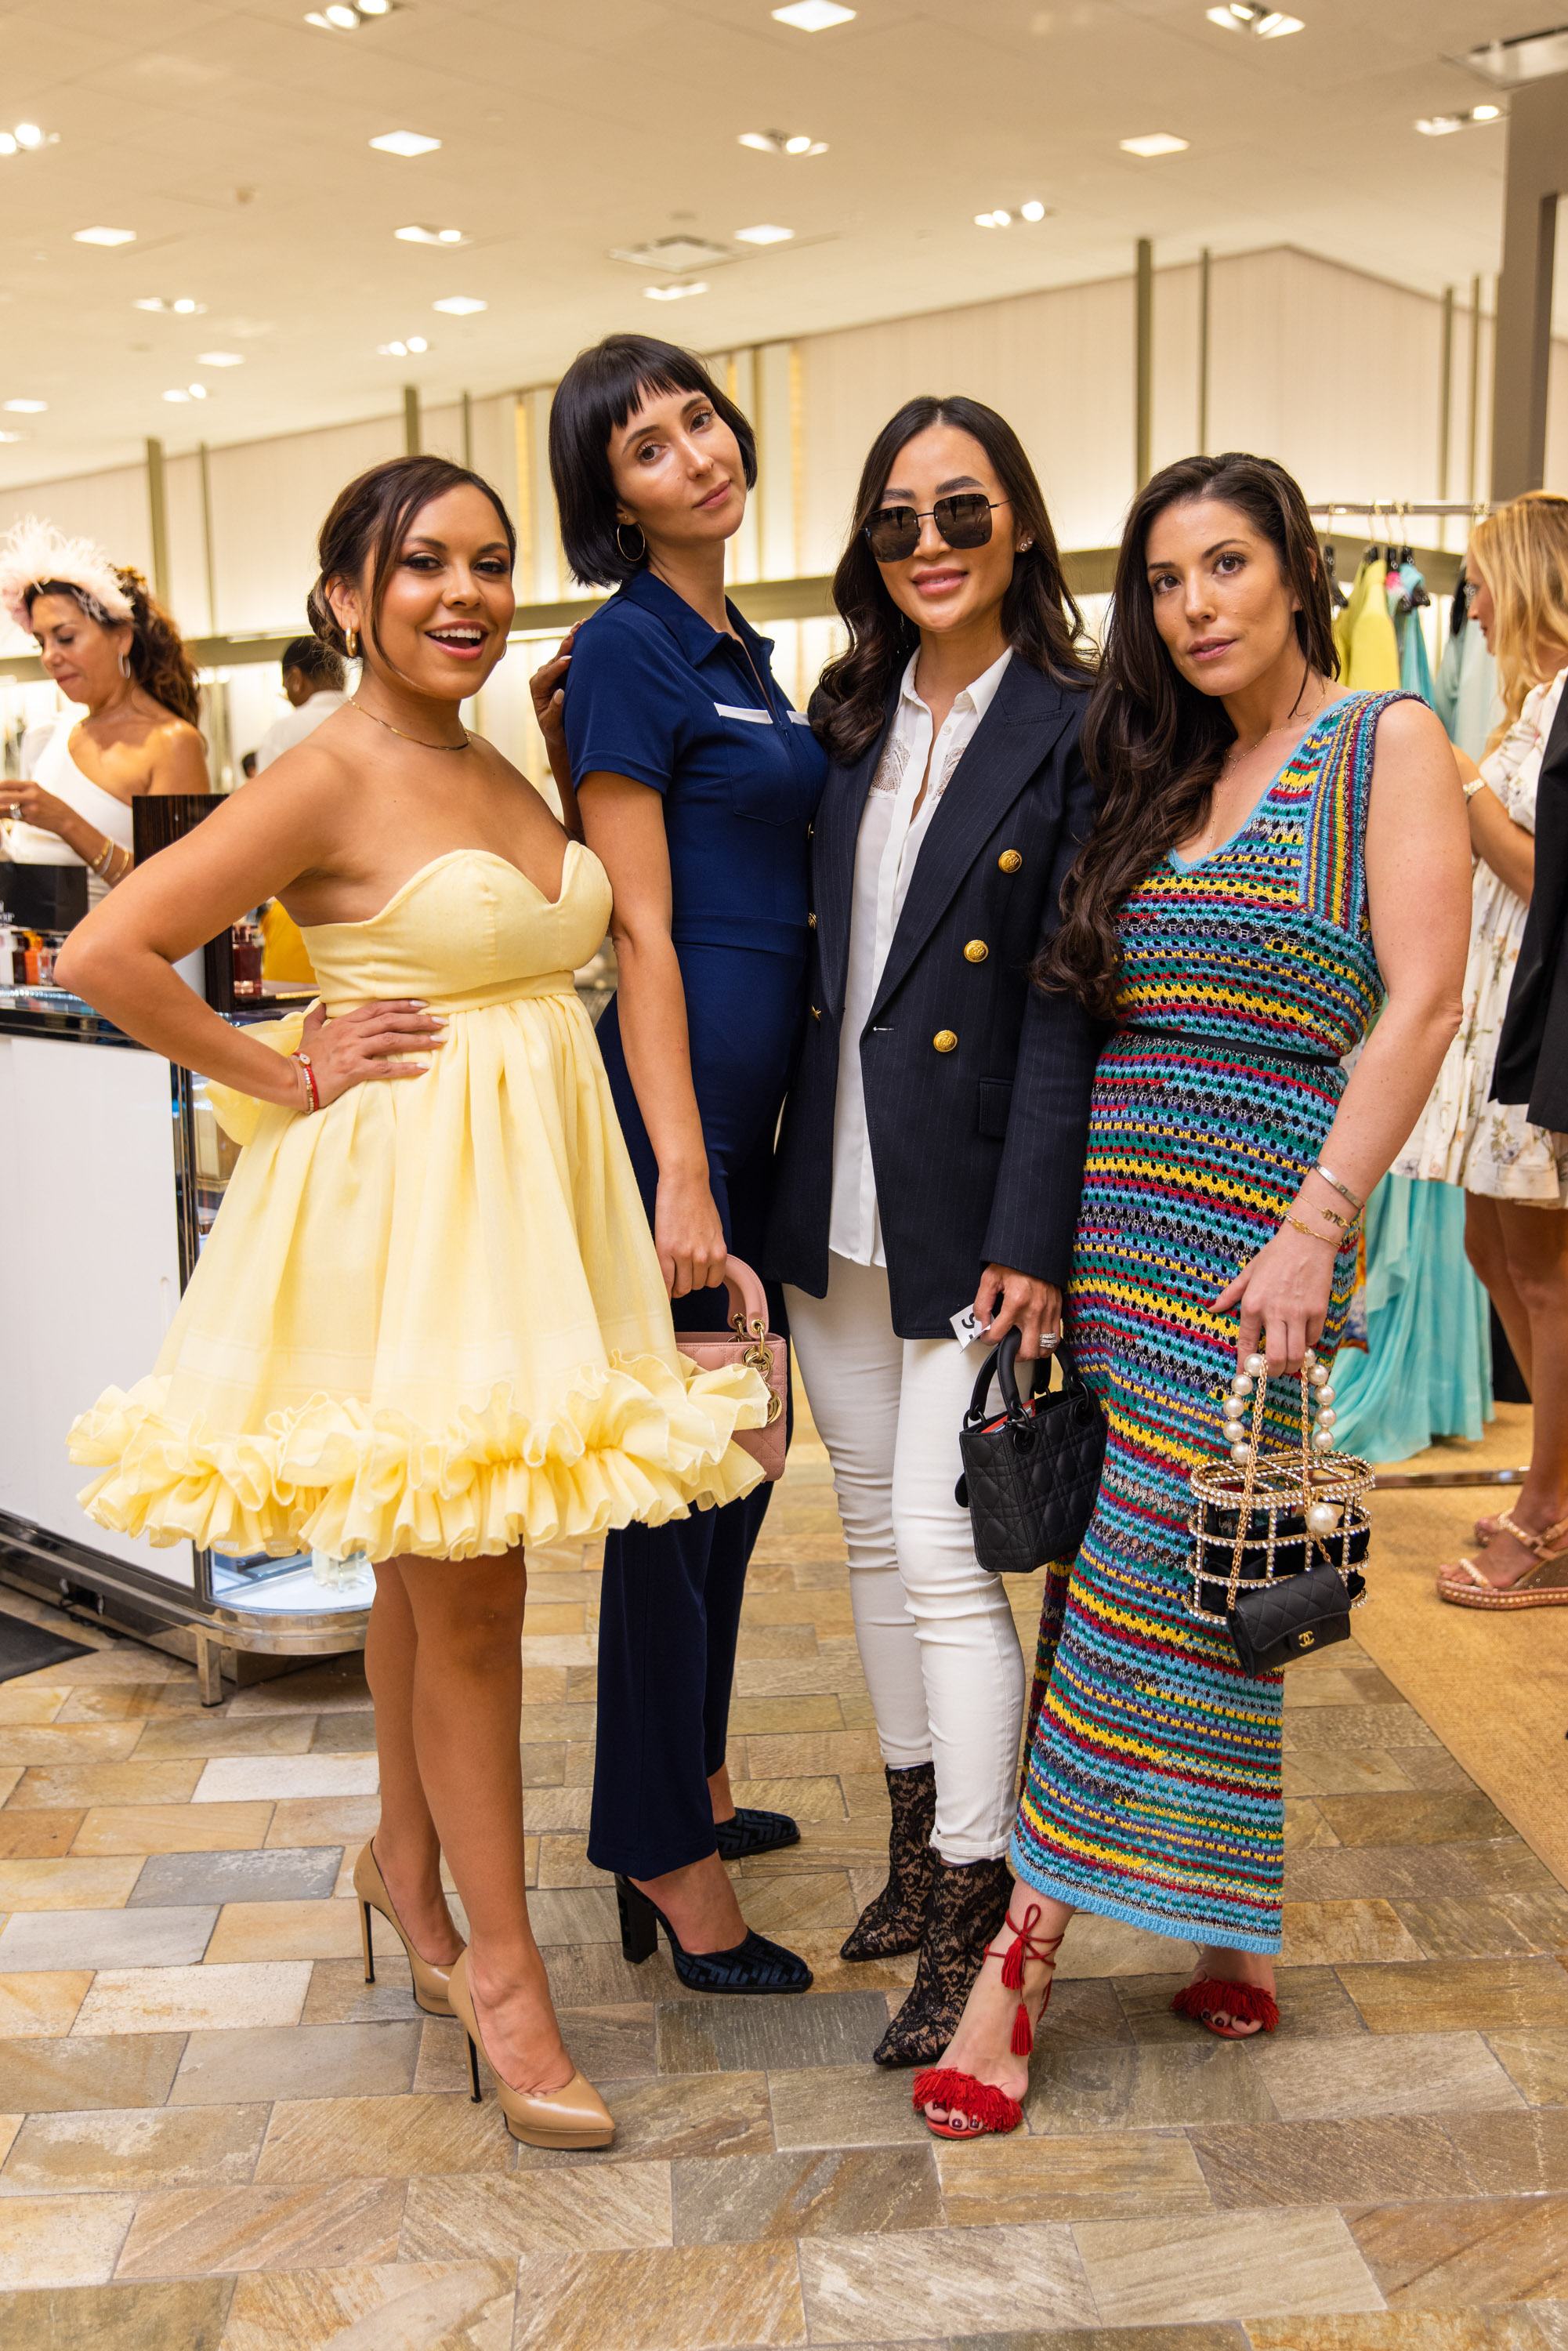 A variety of images showcasing the annual Pegasus World Cup “Off To The Races” fashion show. Images include guests in attendance, models walking the runway in looks from Neiman Marcus, and overall event atmosphere.